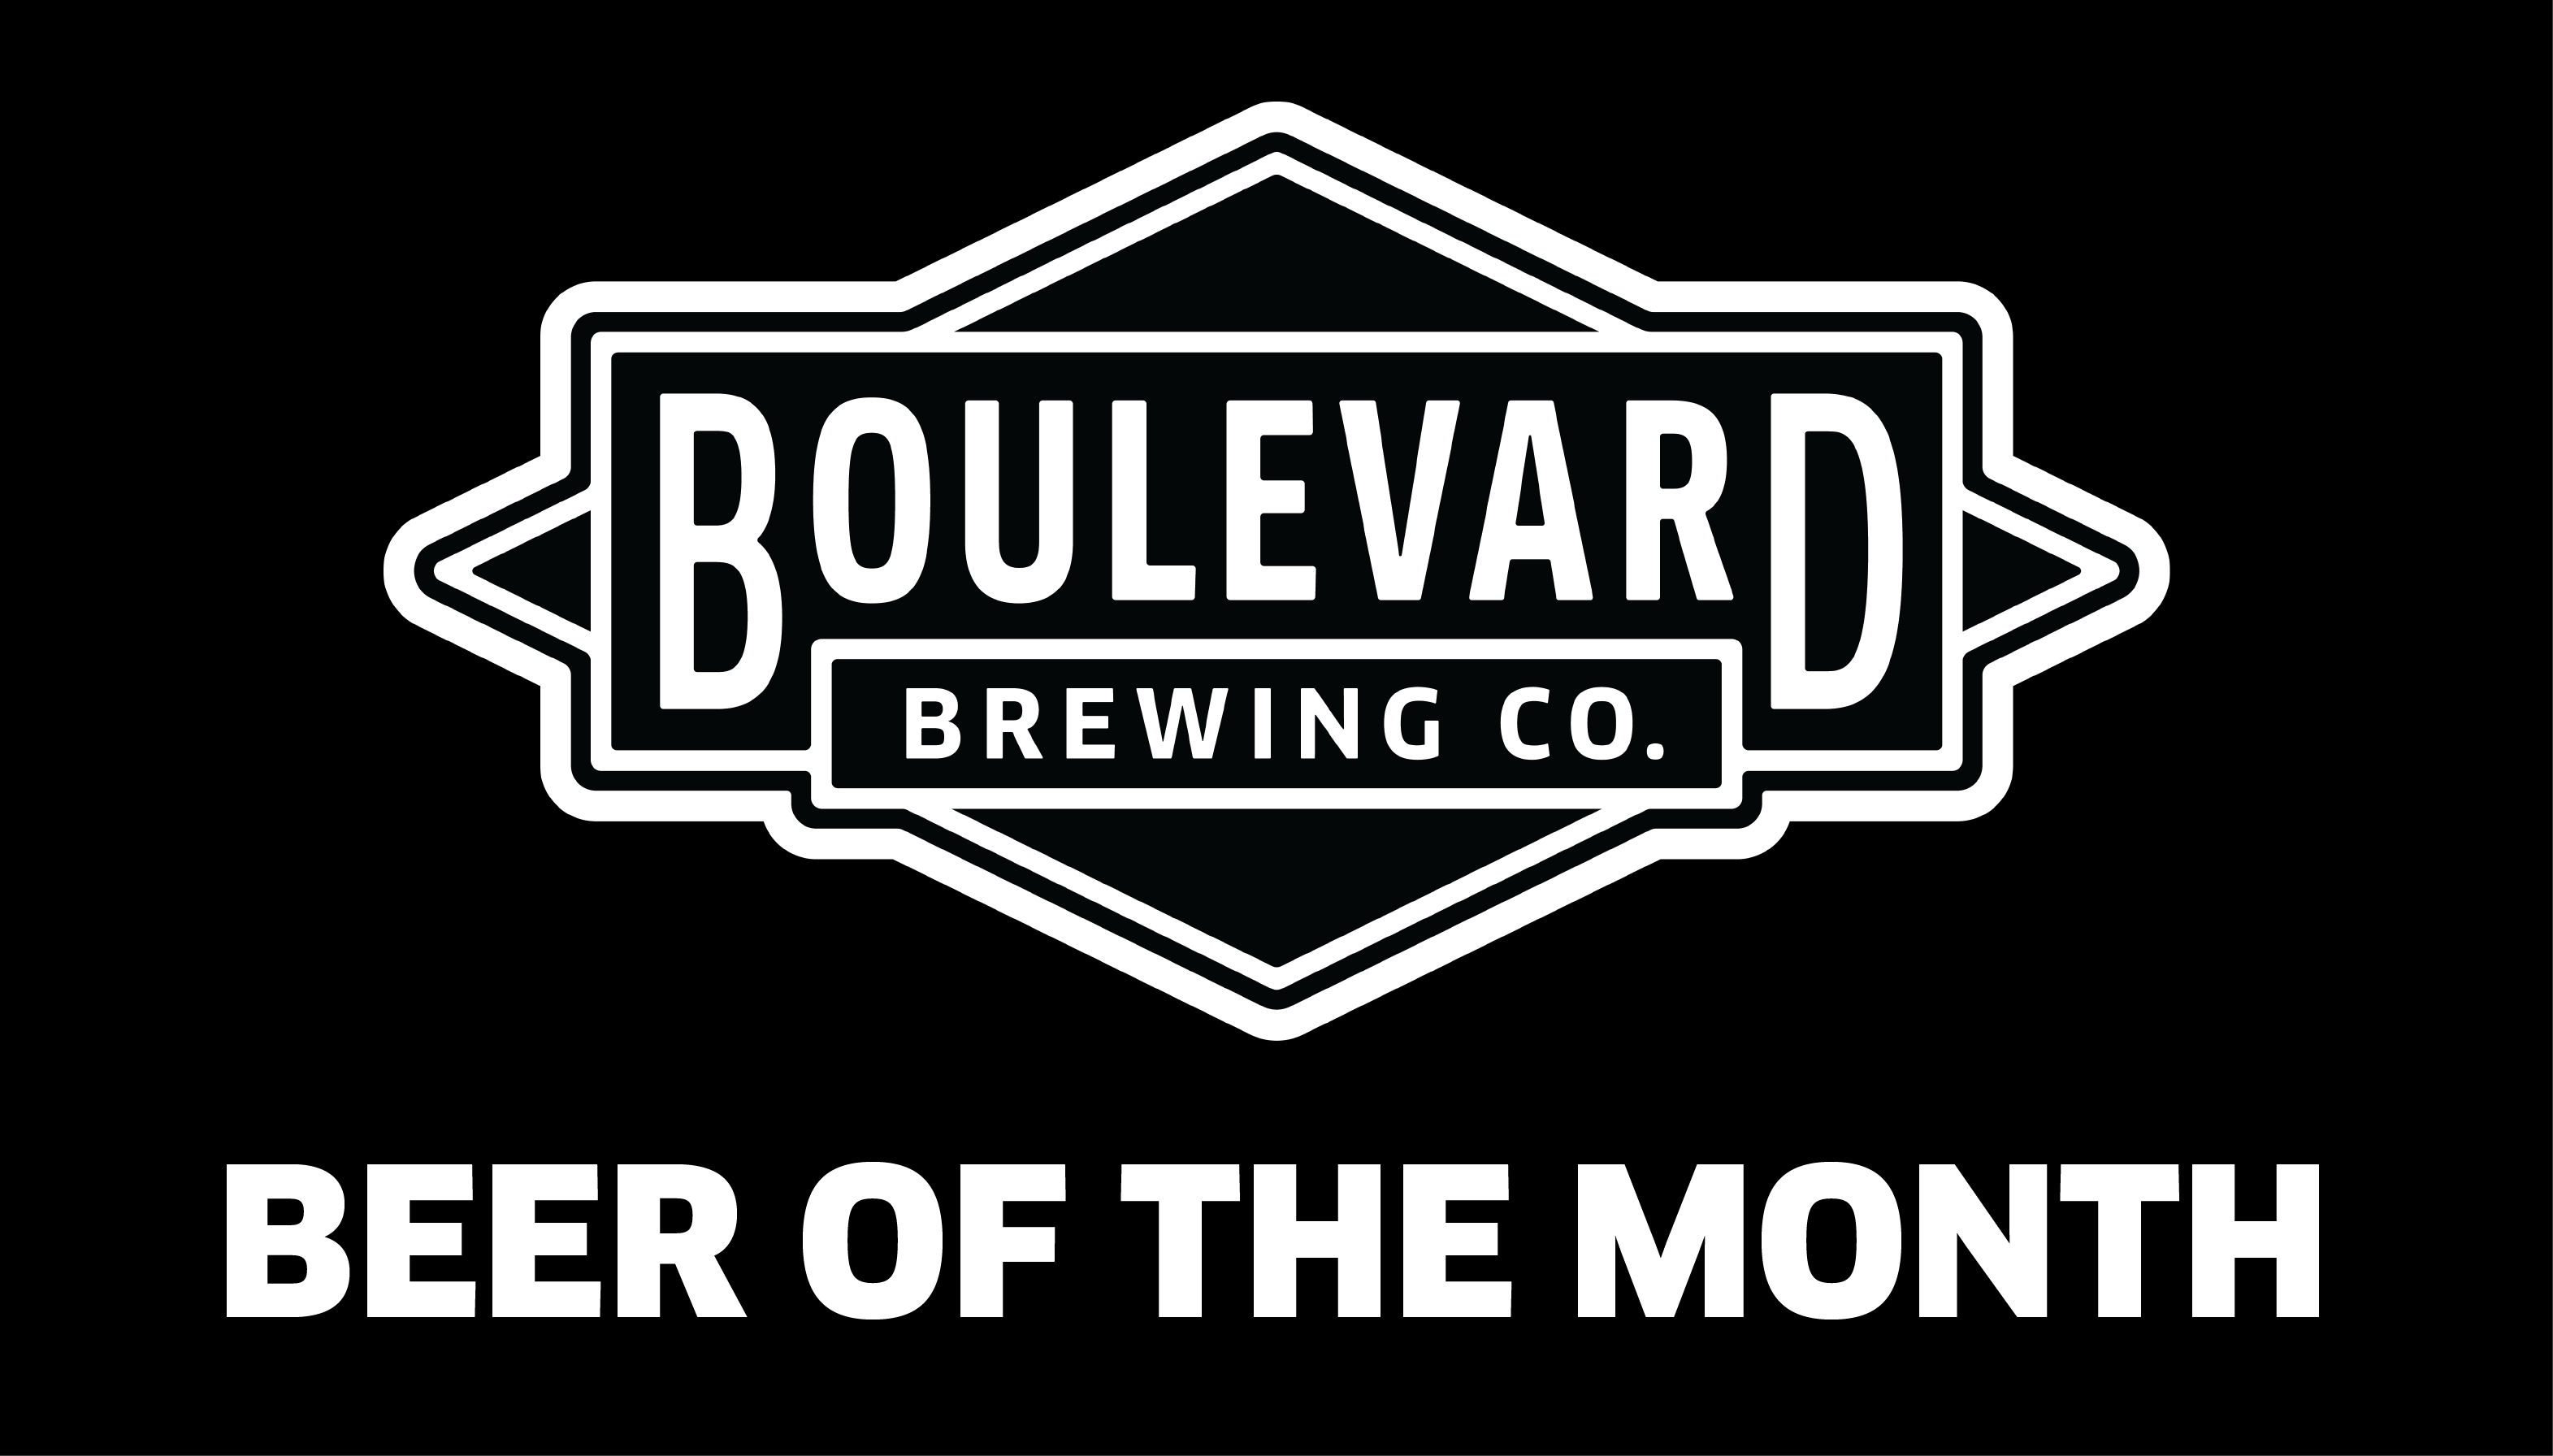 Boulevard beer of the month